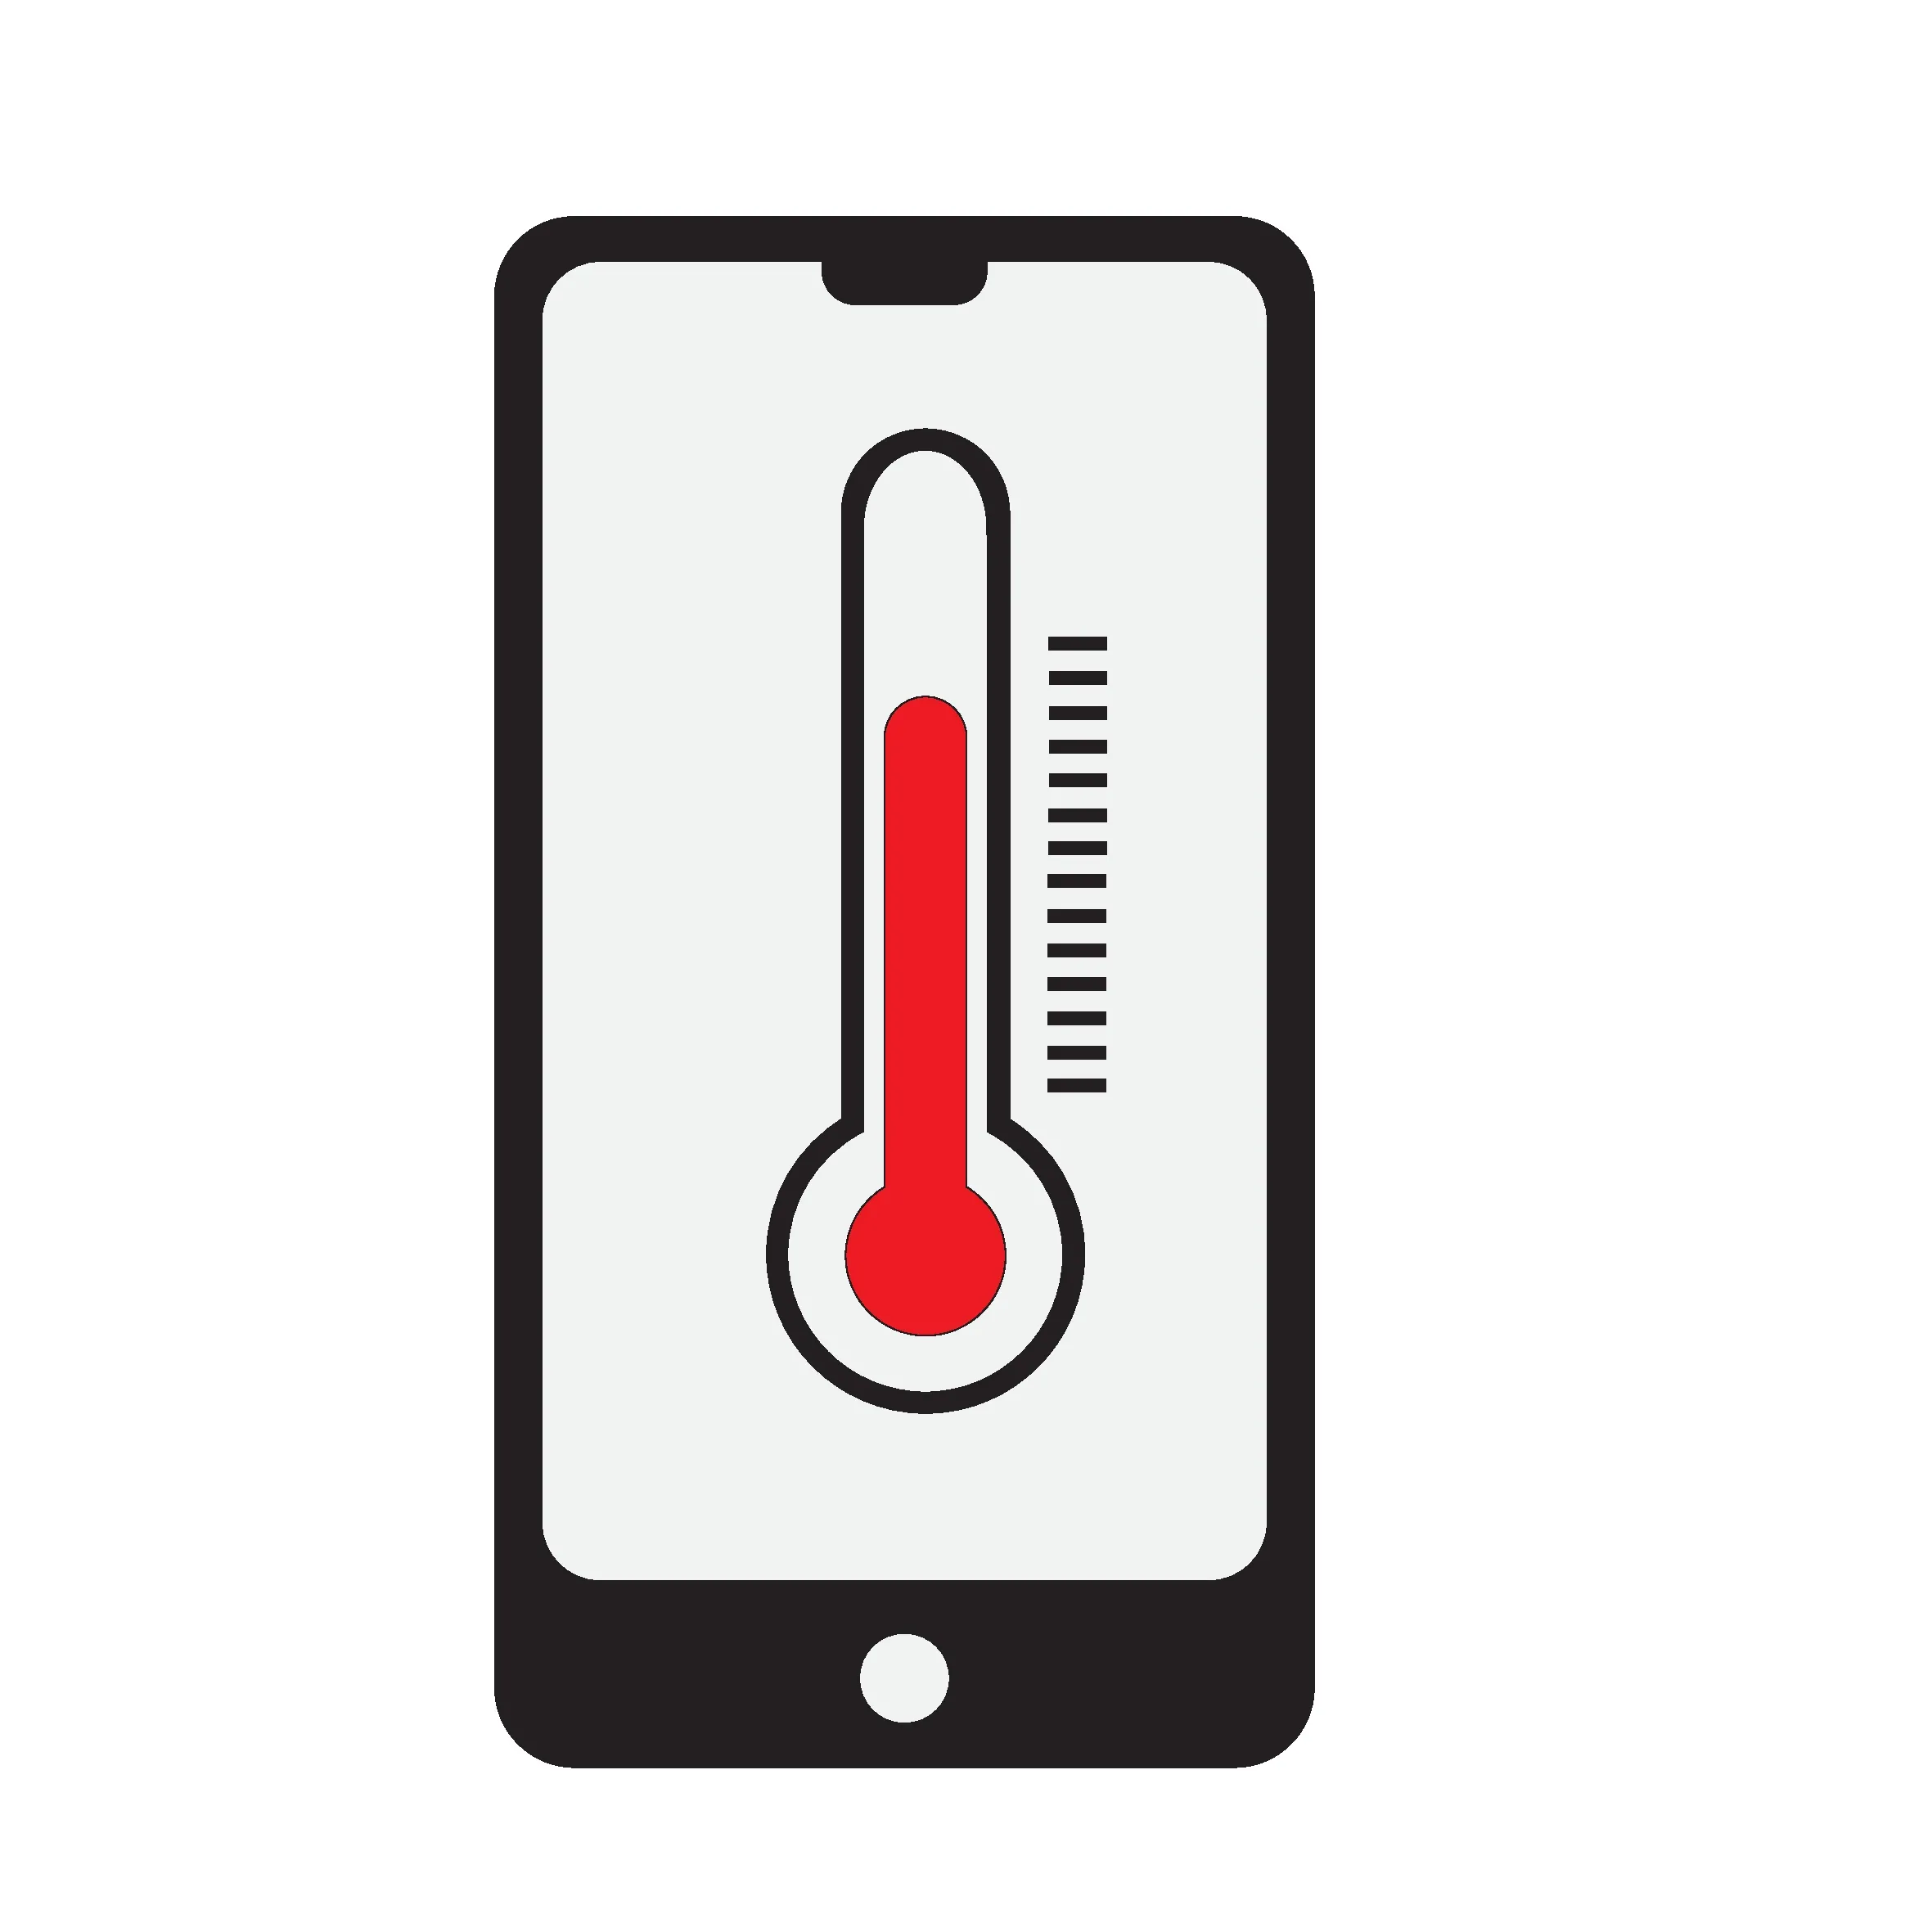 5 Practical Tips to Prevent Smartphone Overheating